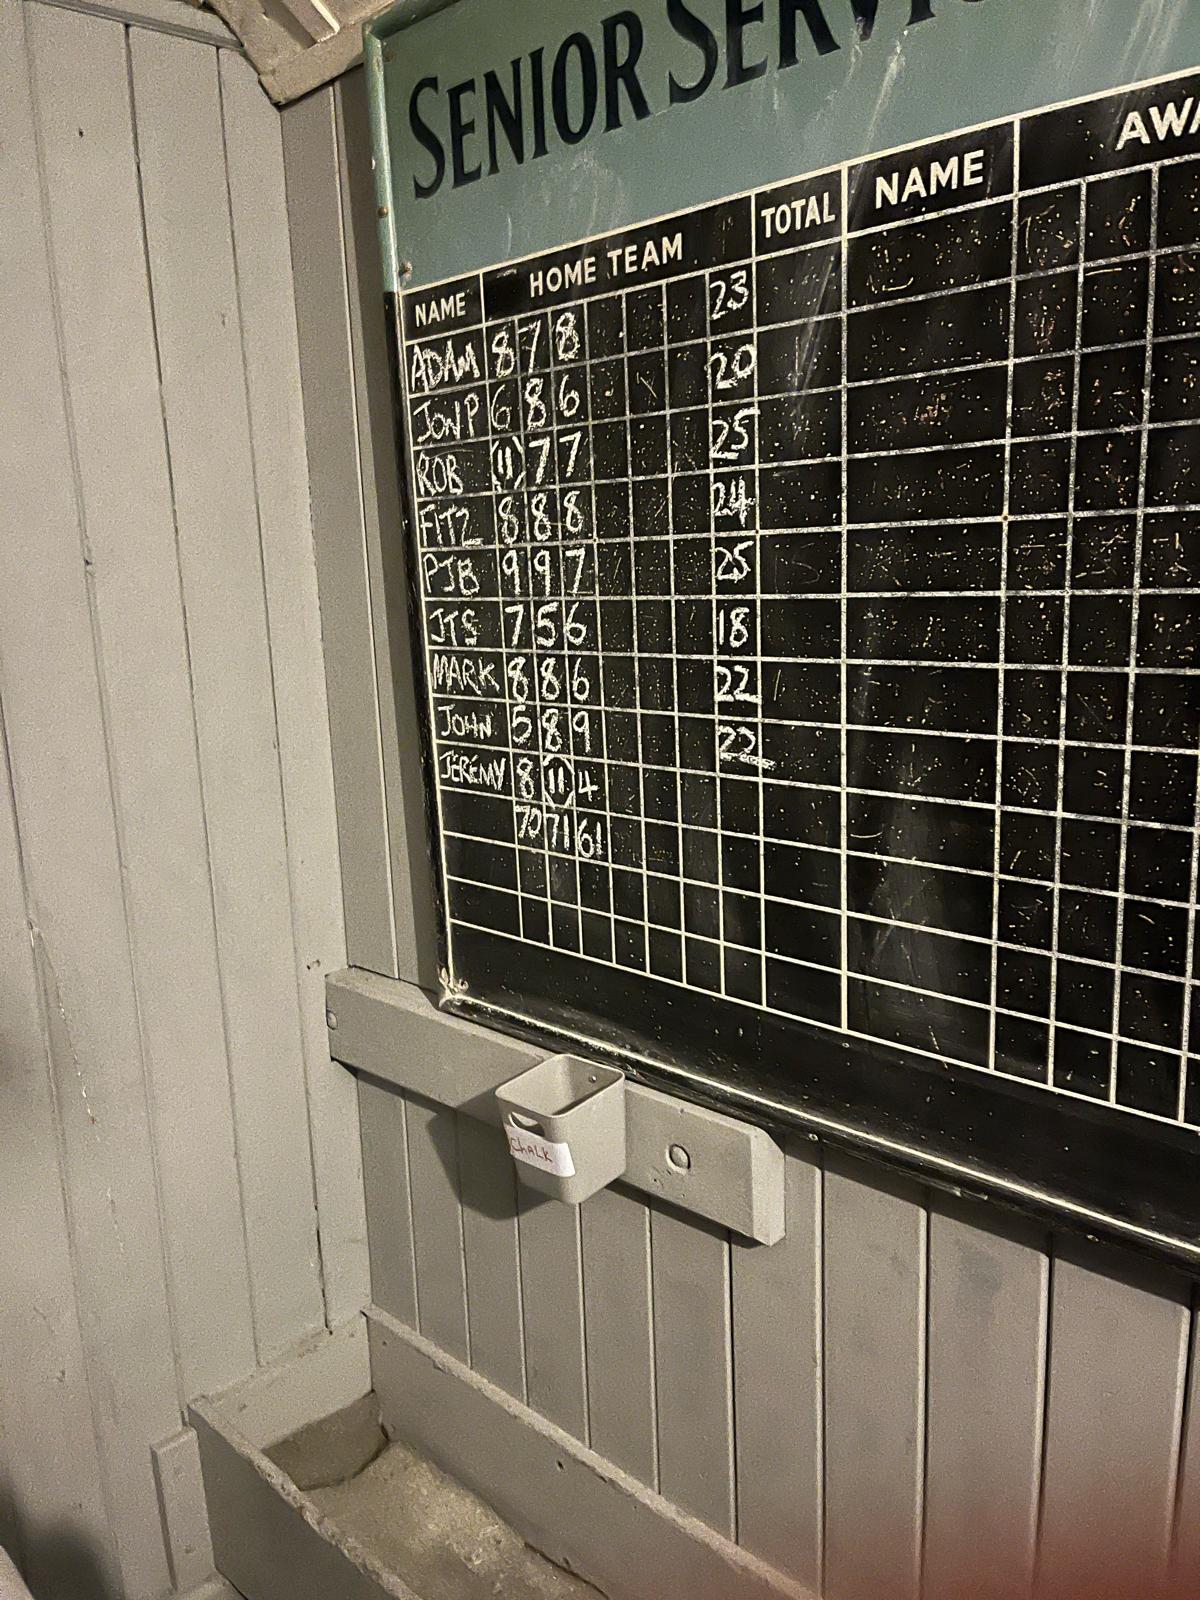 The scoreboard at the Sexey's Arms at the precise point when we realised we were playing at the wrong venue. So basically the skittles equivalent of the dining table on board the Marie Celeste.